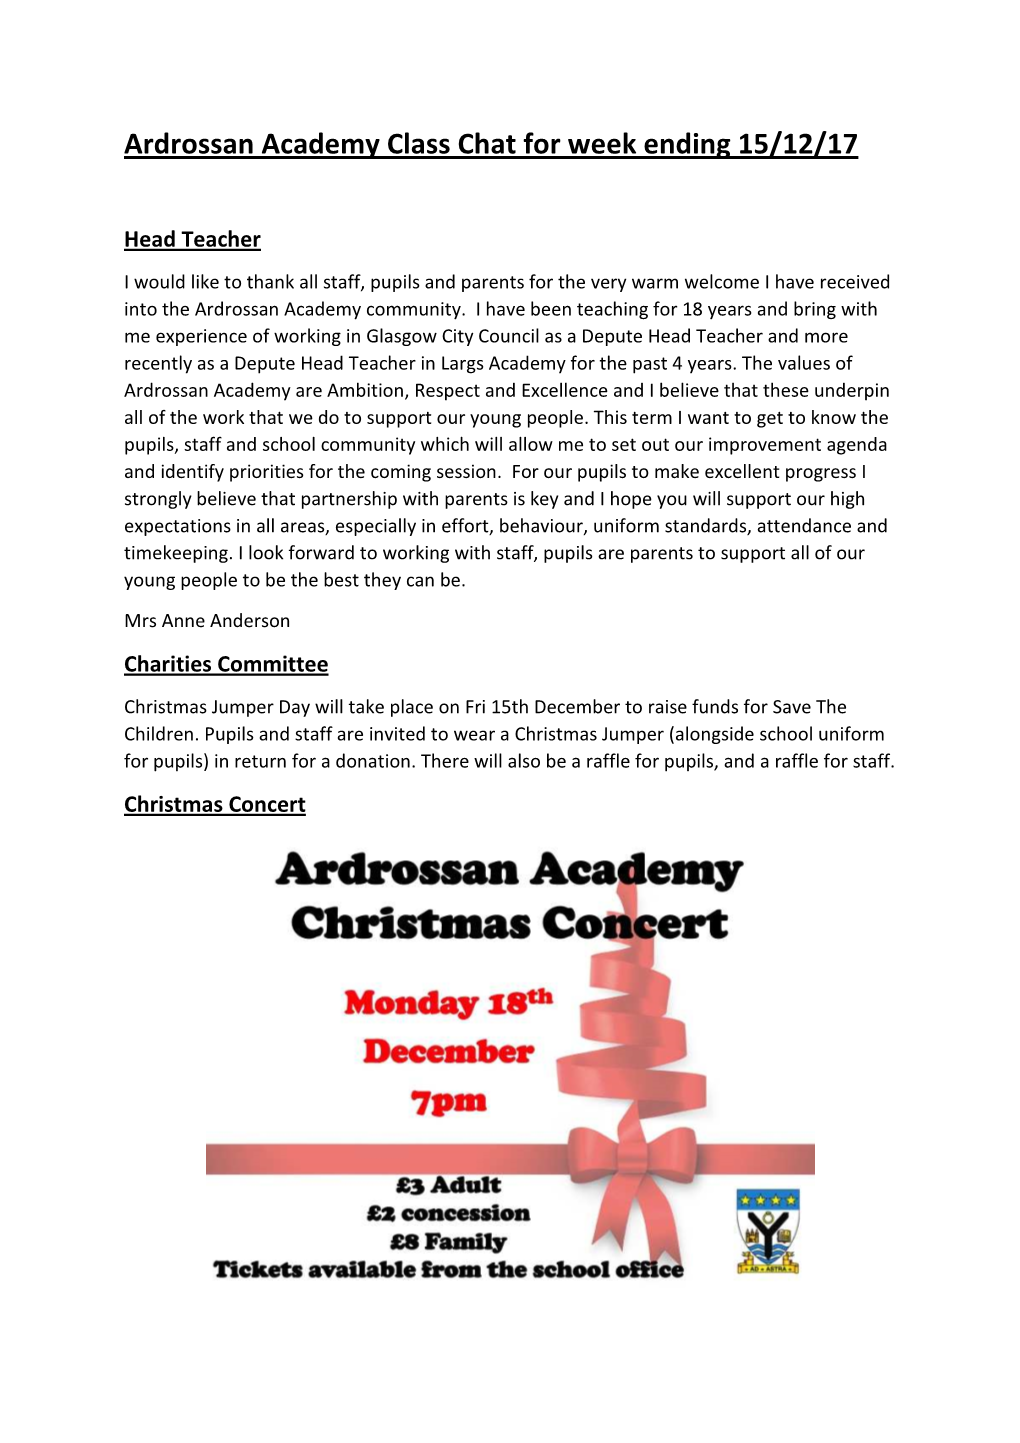 Ardrossan Academy Class Chat for Week Ending 15Th